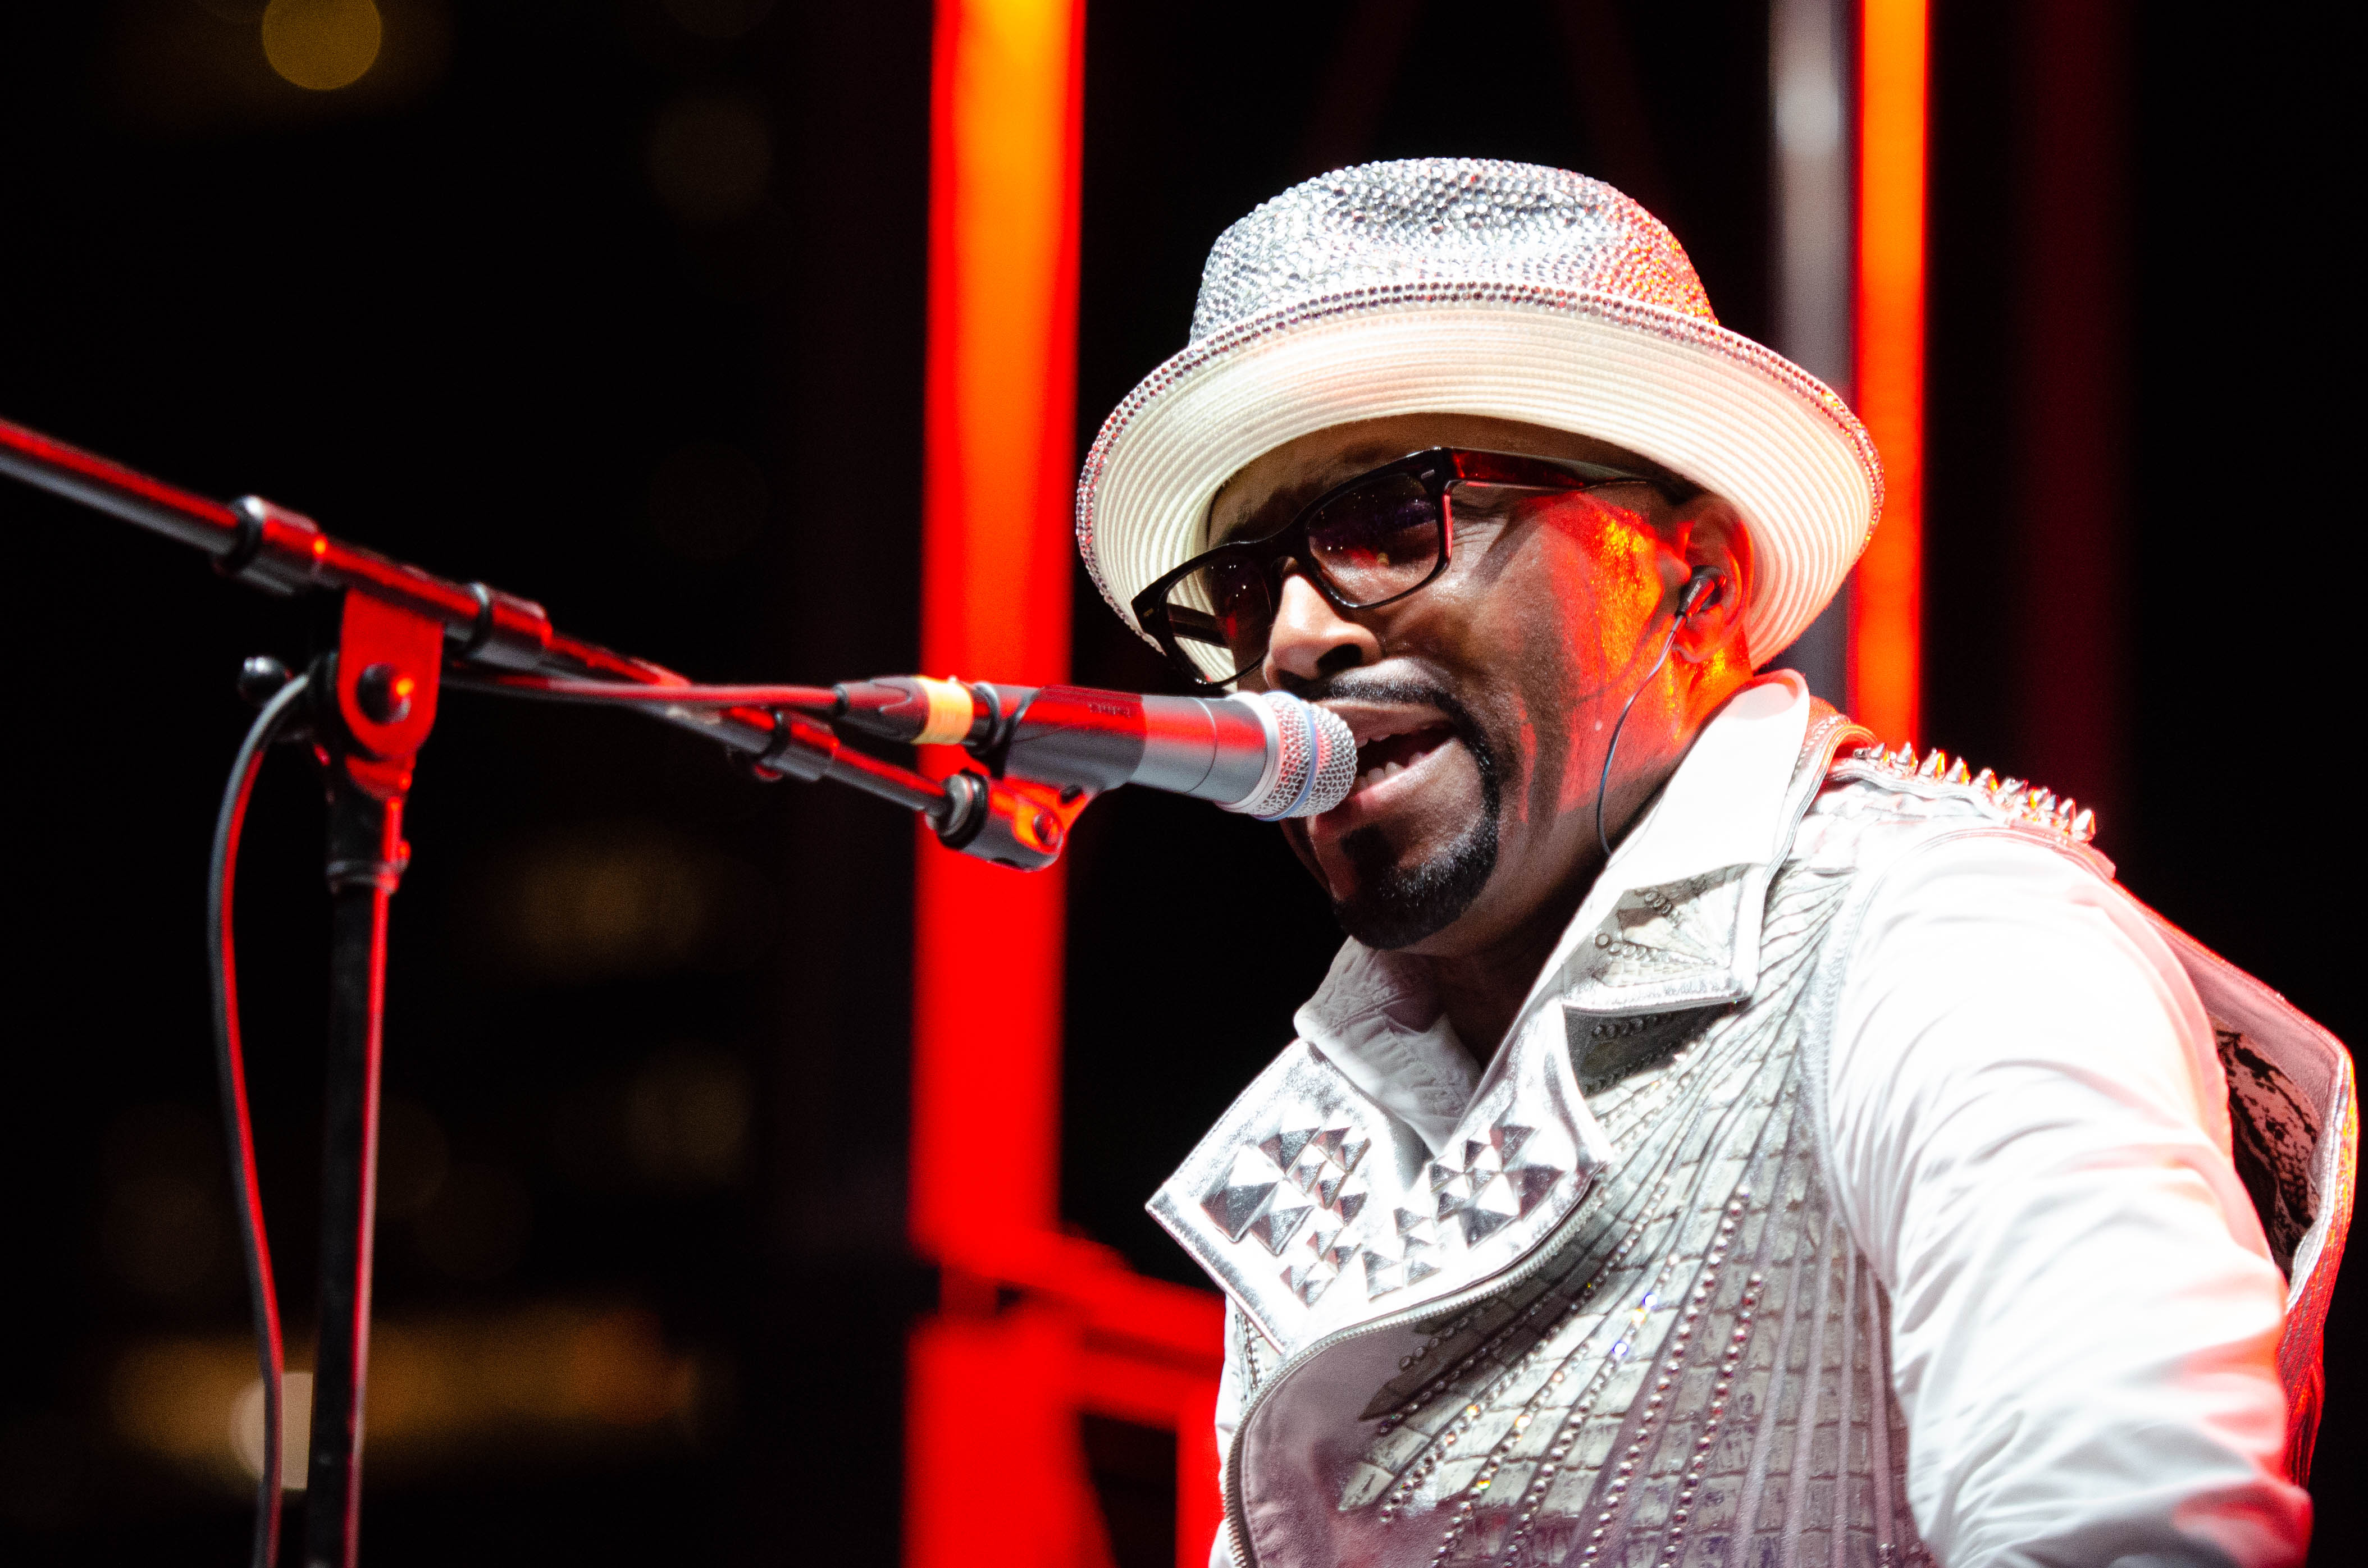 Teddy Riley of Blackstreet, captivates the crowd with his sultry autotune vocals at this years Urban Music Festival in Austin, TX. Photo by The Signal reporter Shalnora Worlds